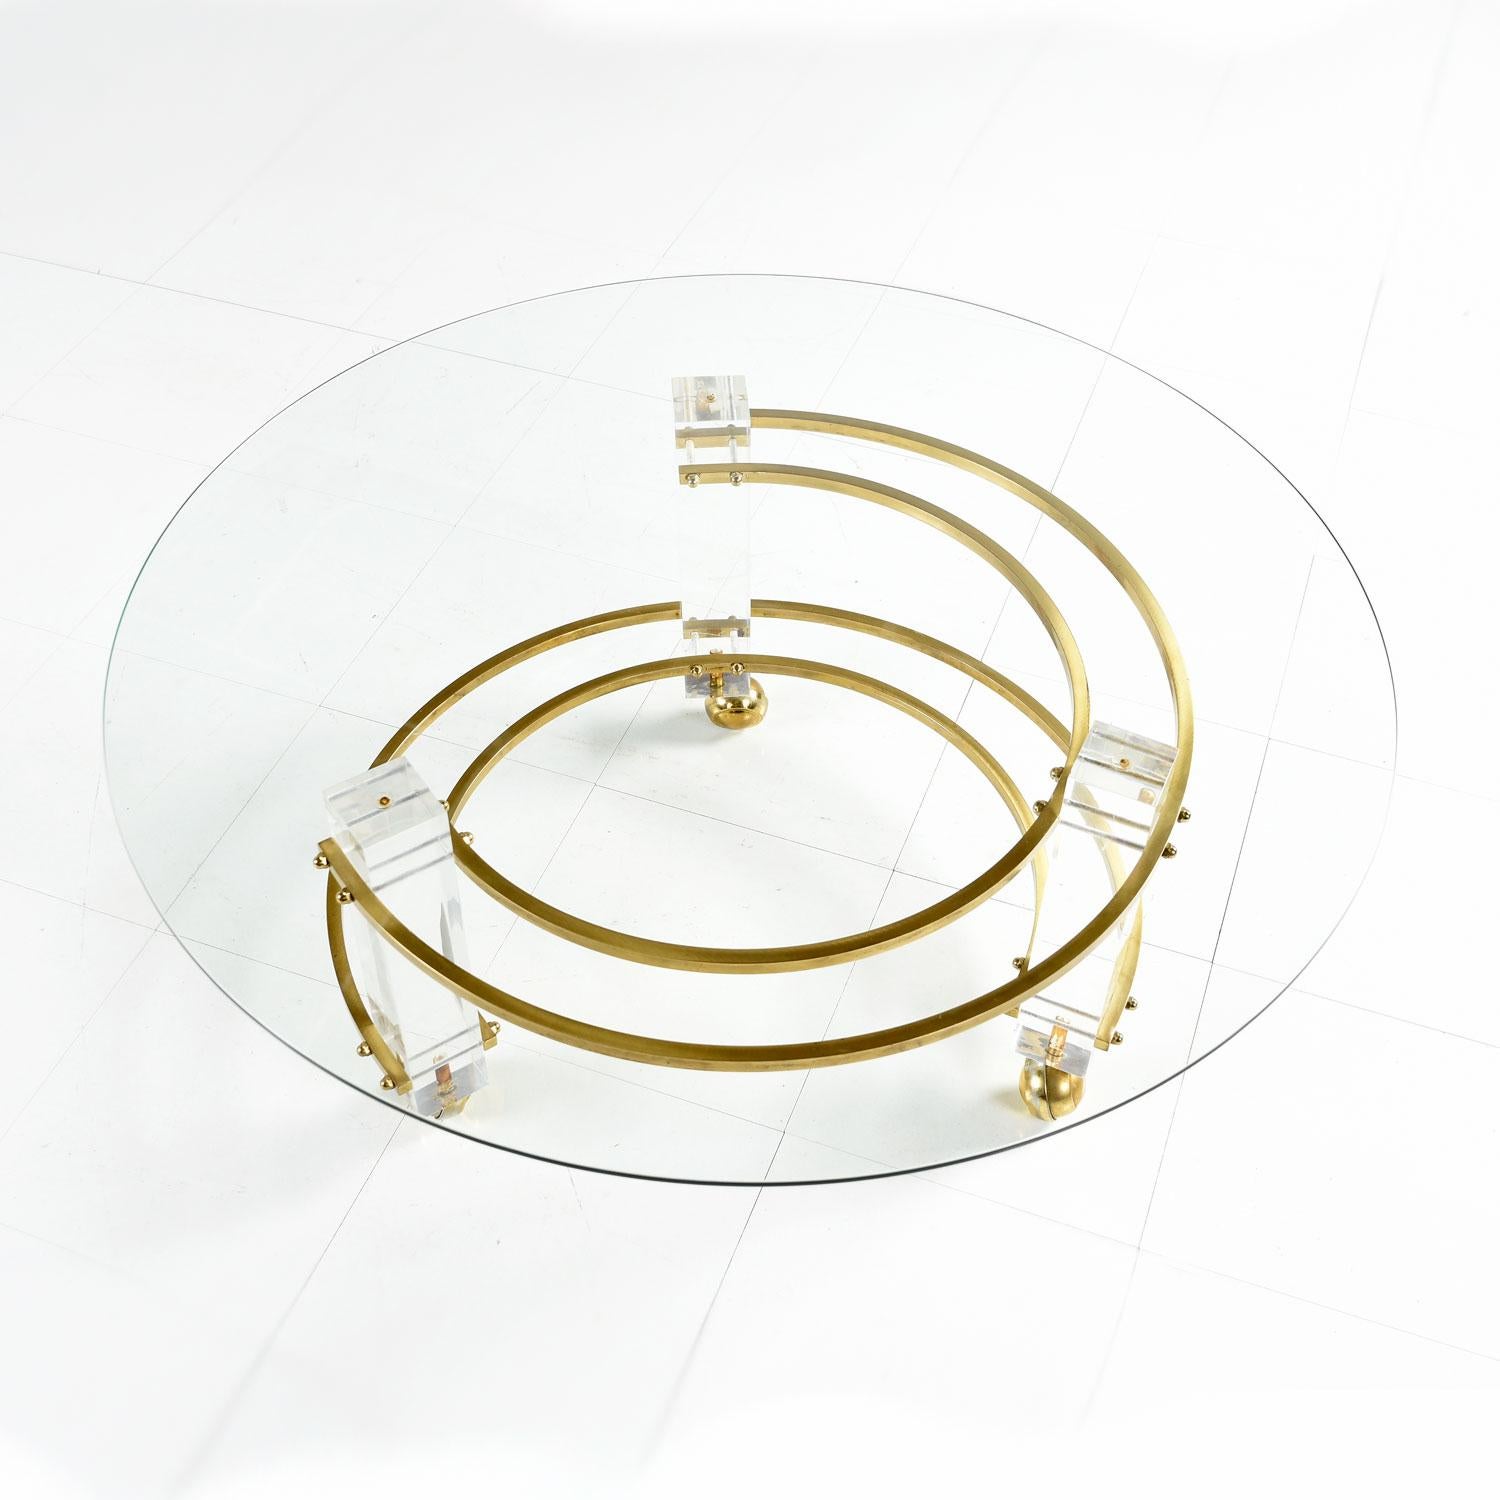 Spectacular vintage Hollywood Regency Lucite coffee table in the style of Charles Hollis Jones. The glass top has a rounded silhouette mimicking the dynamic contours of the table base. Staggered, semi-circle brass spanners convex at the bottom and